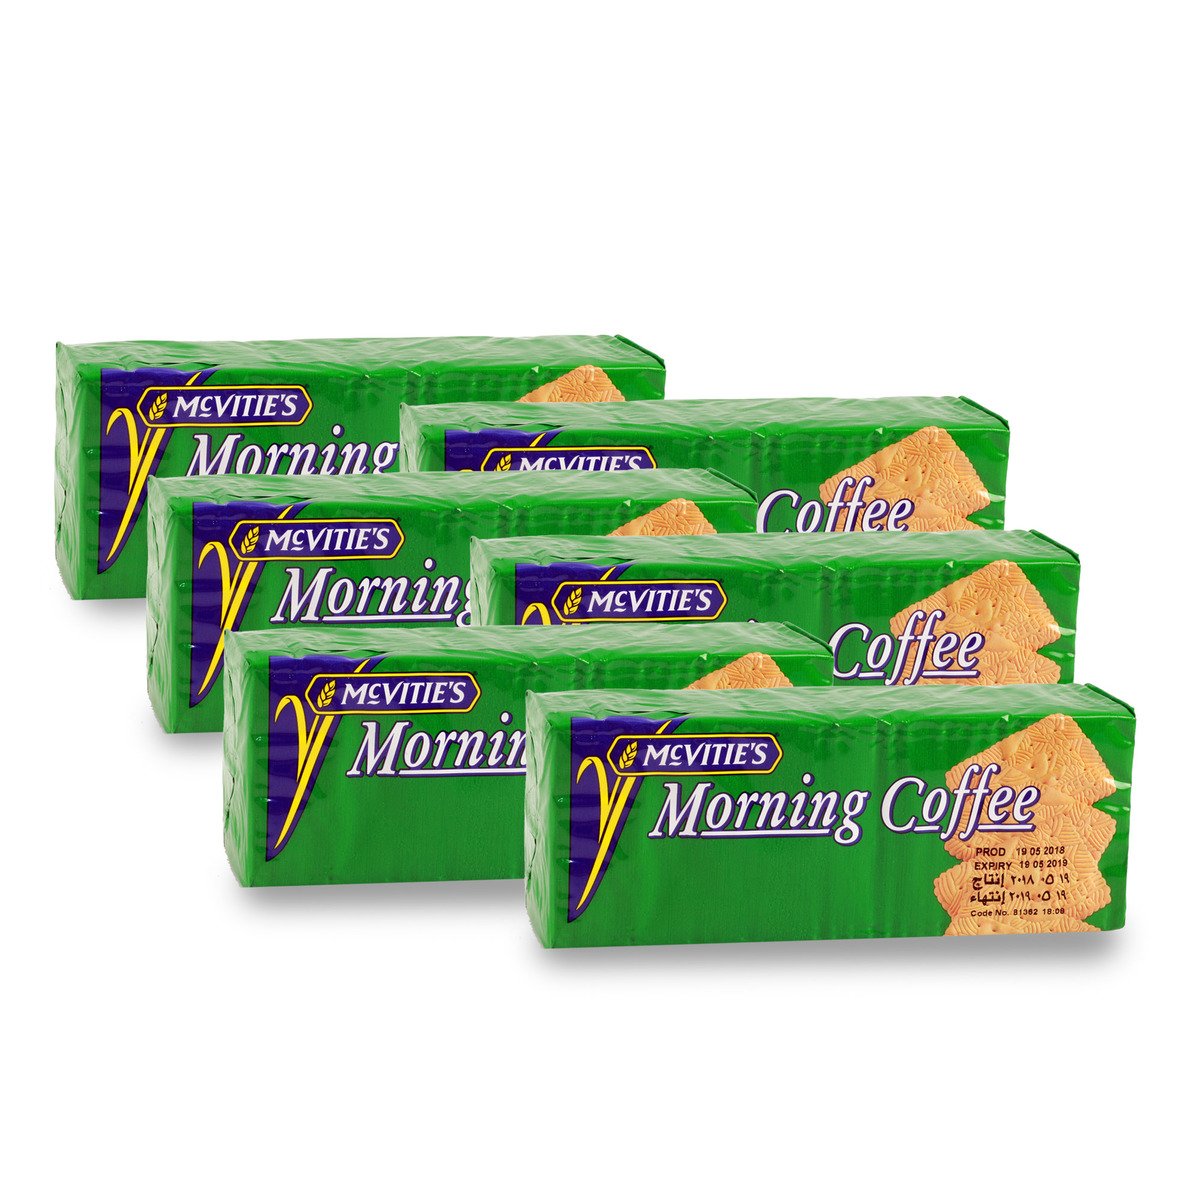 McVitie's Morning Coffee Biscuit 150 g 6 pcs